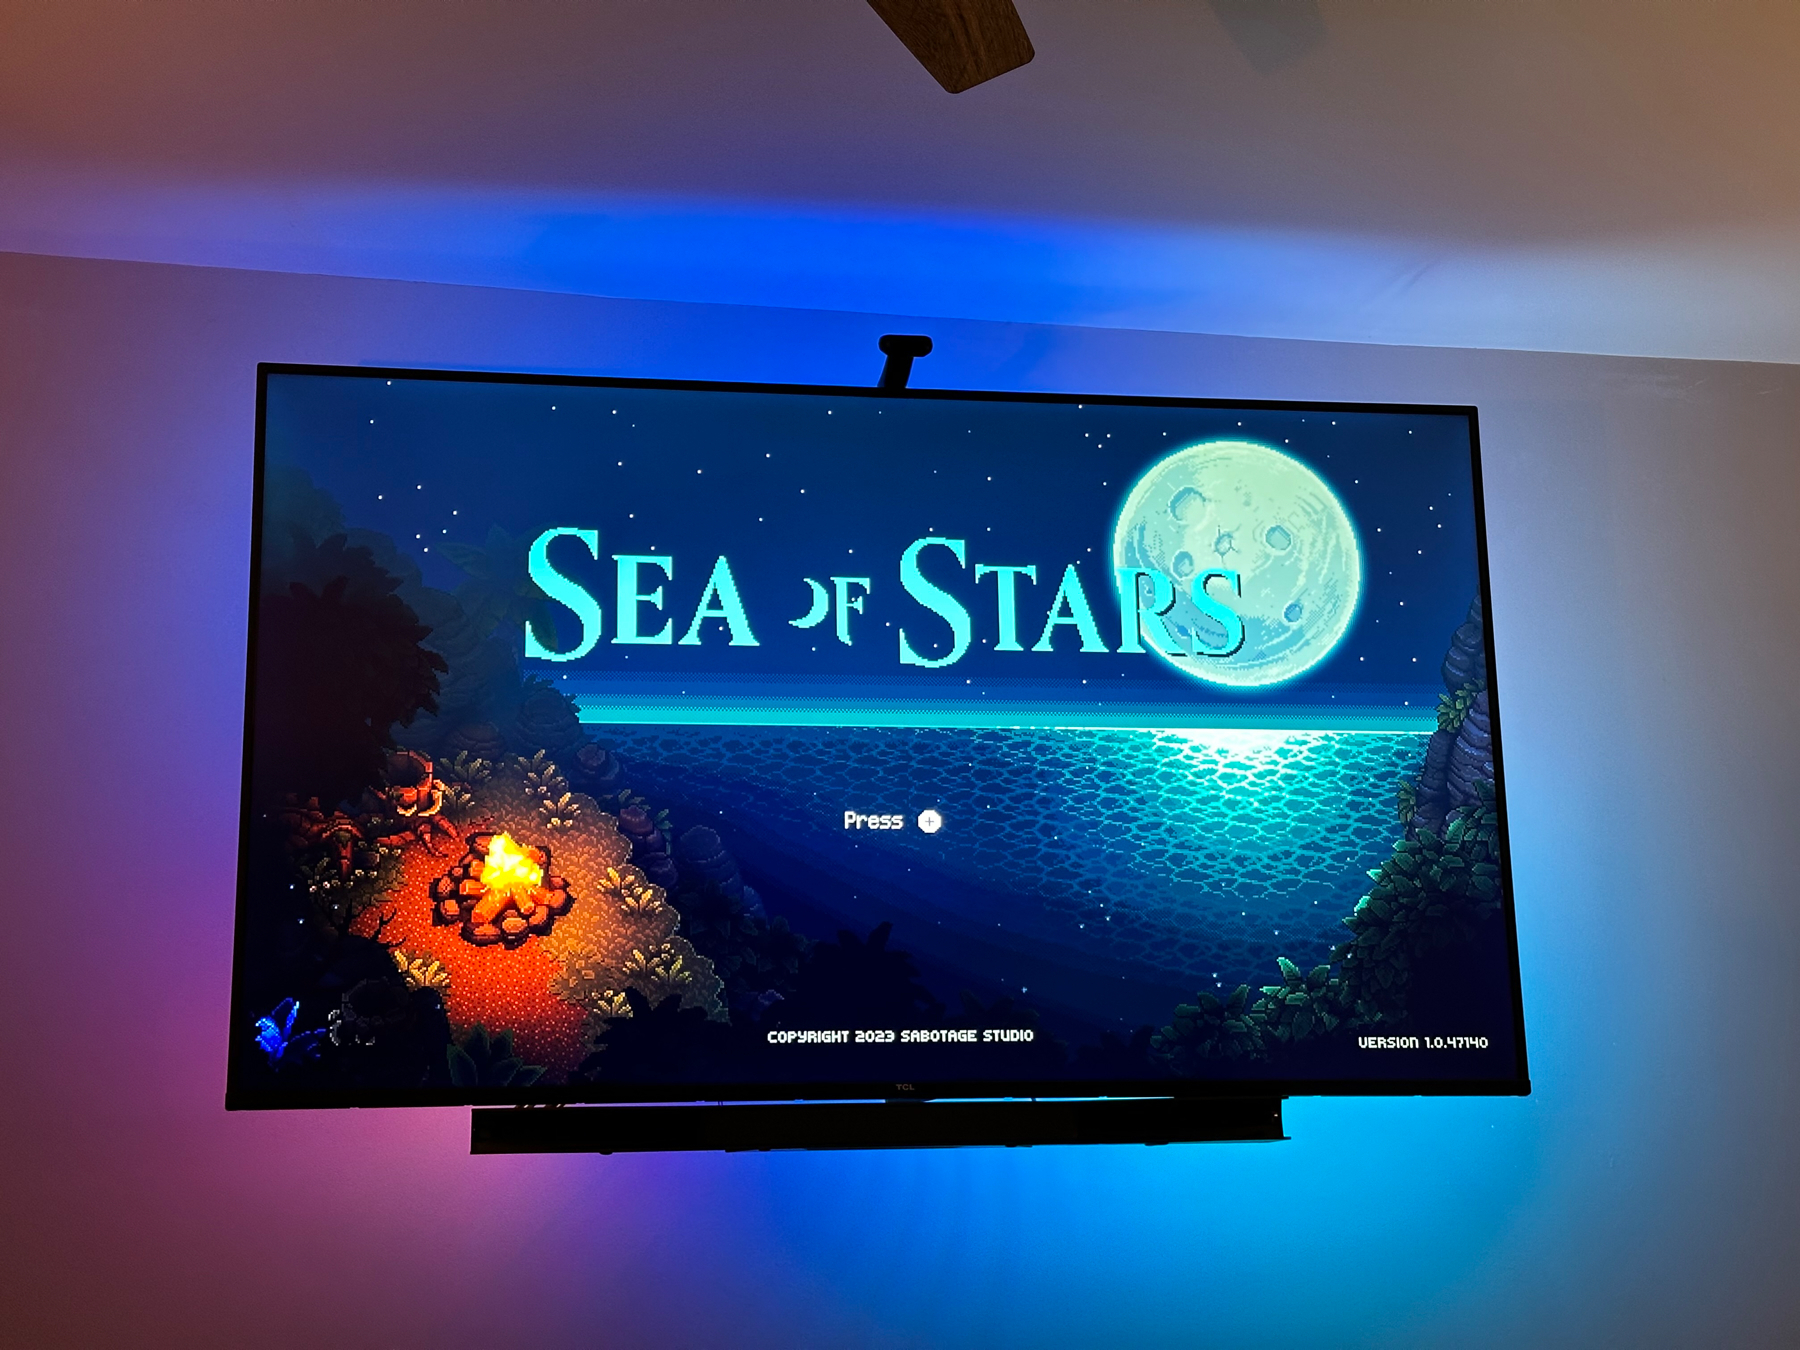 A television mounted on a wall displaying the title screen of the “Sea of Stars” video game, with stylized pixel art graphics showing a moonlit seascape. The room lighting casts a blue ambiance above the TV.